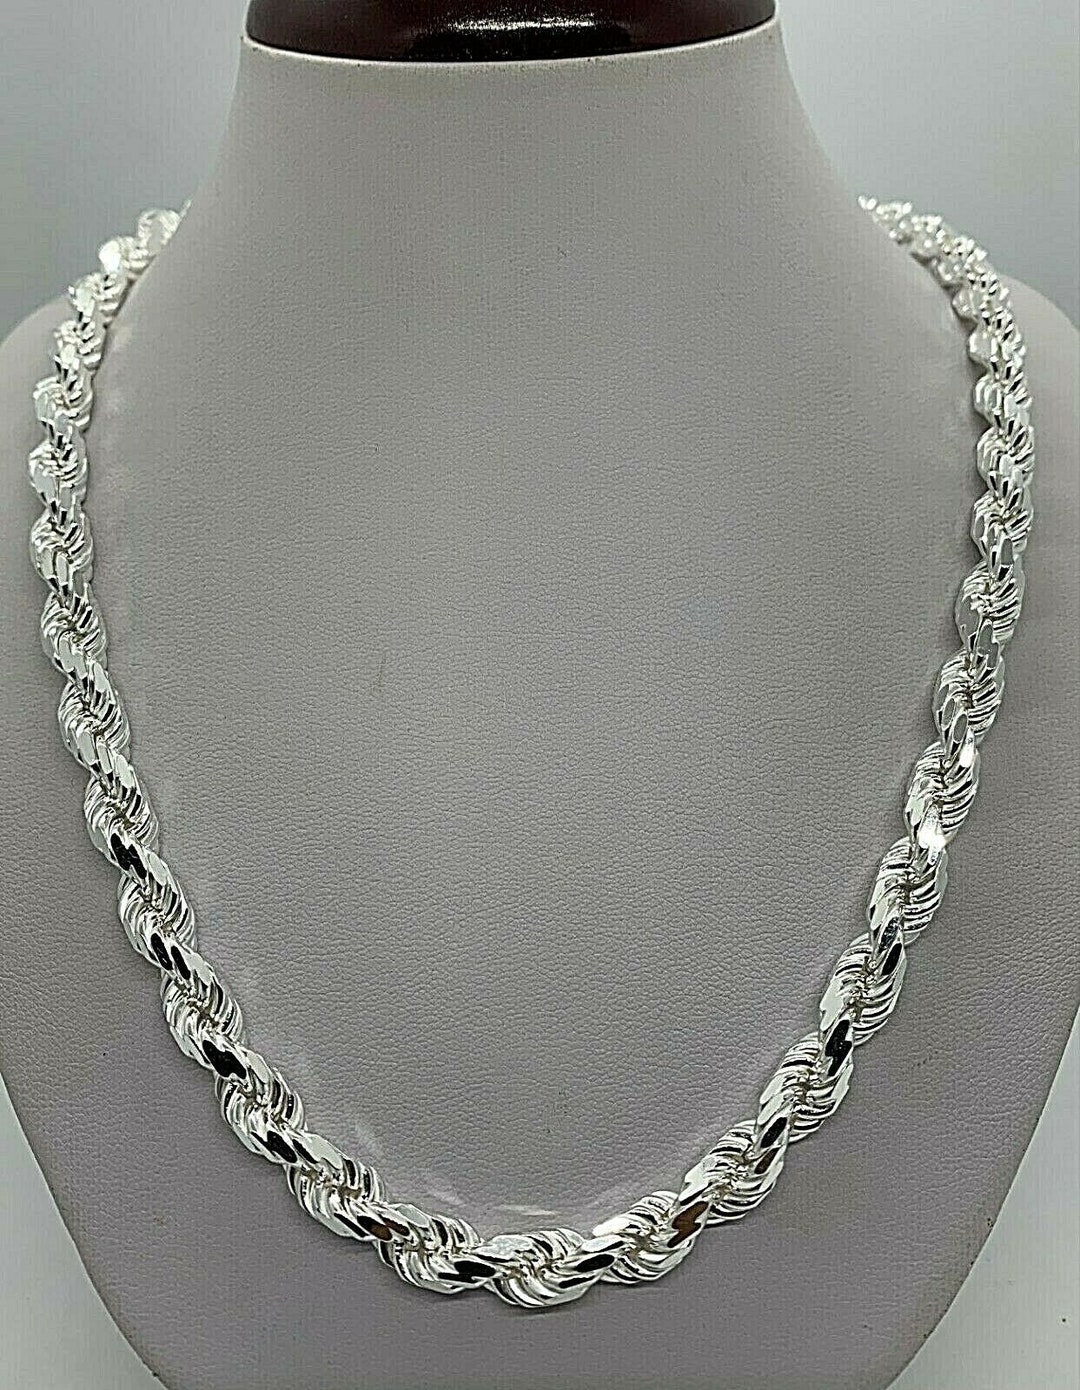 7mm 925 Sterling Silver Men's Solid Handmade Rope Chain Necklace